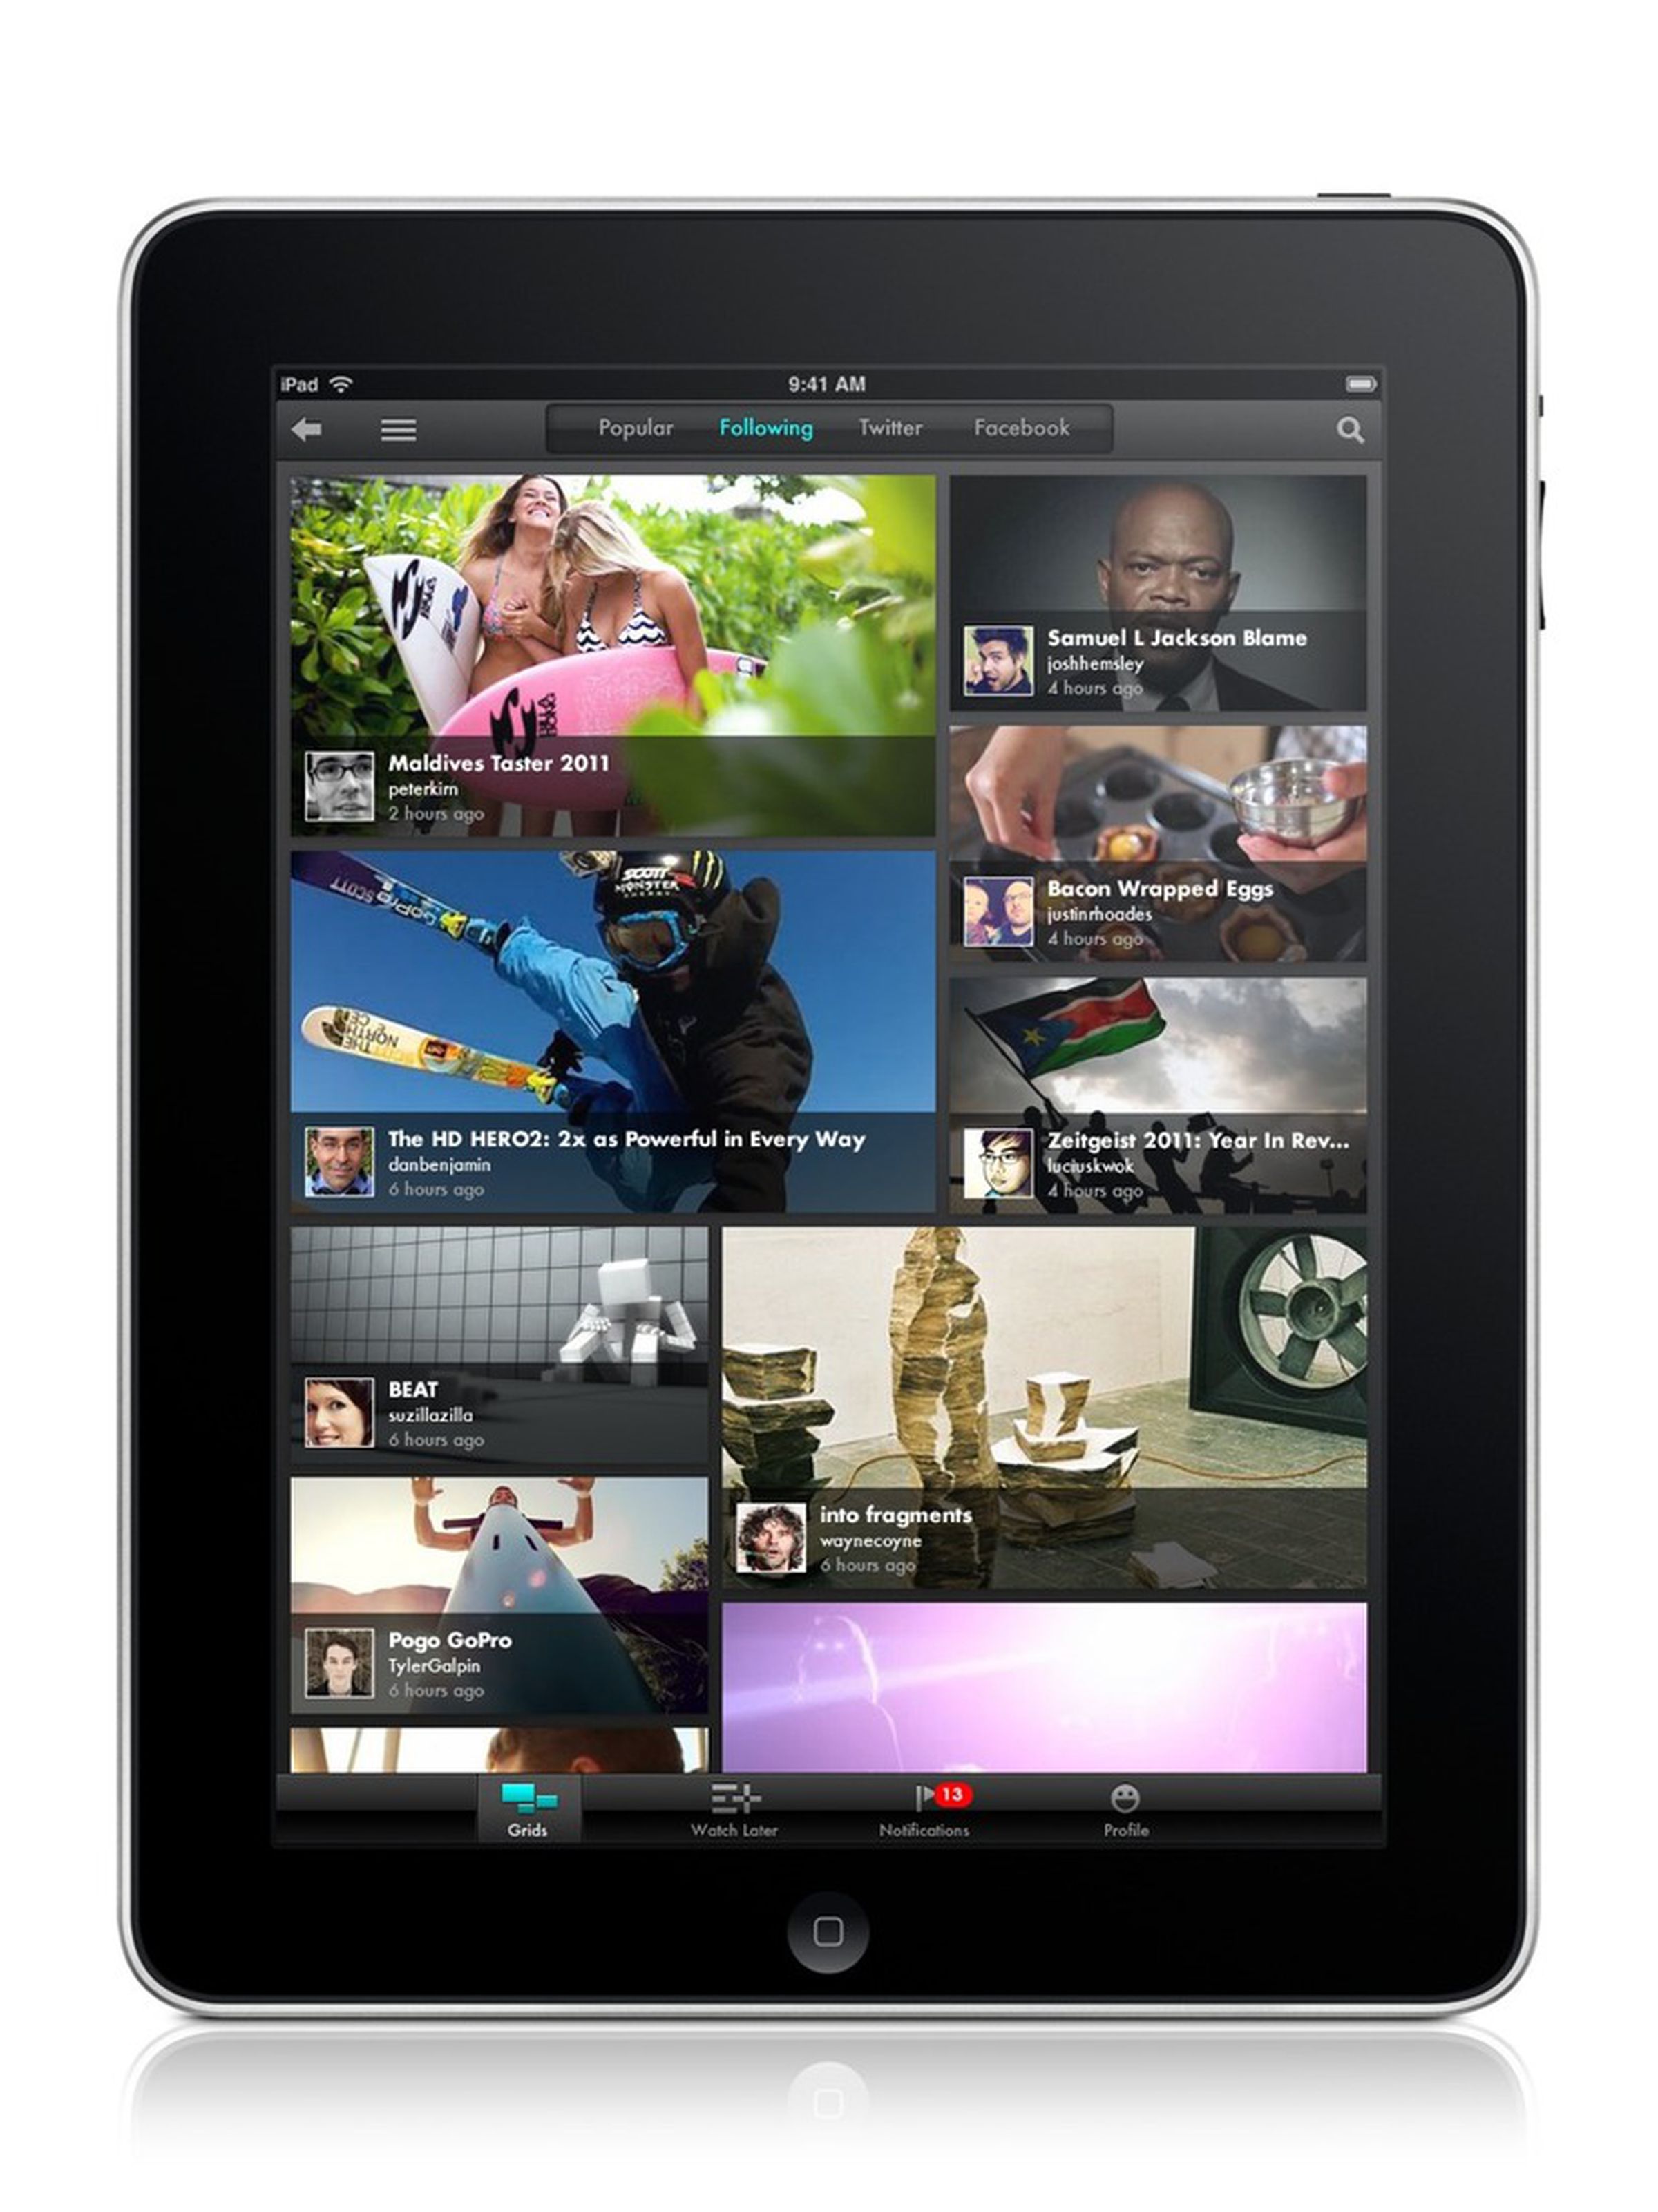 Showyou 3.0 for iPad pictures